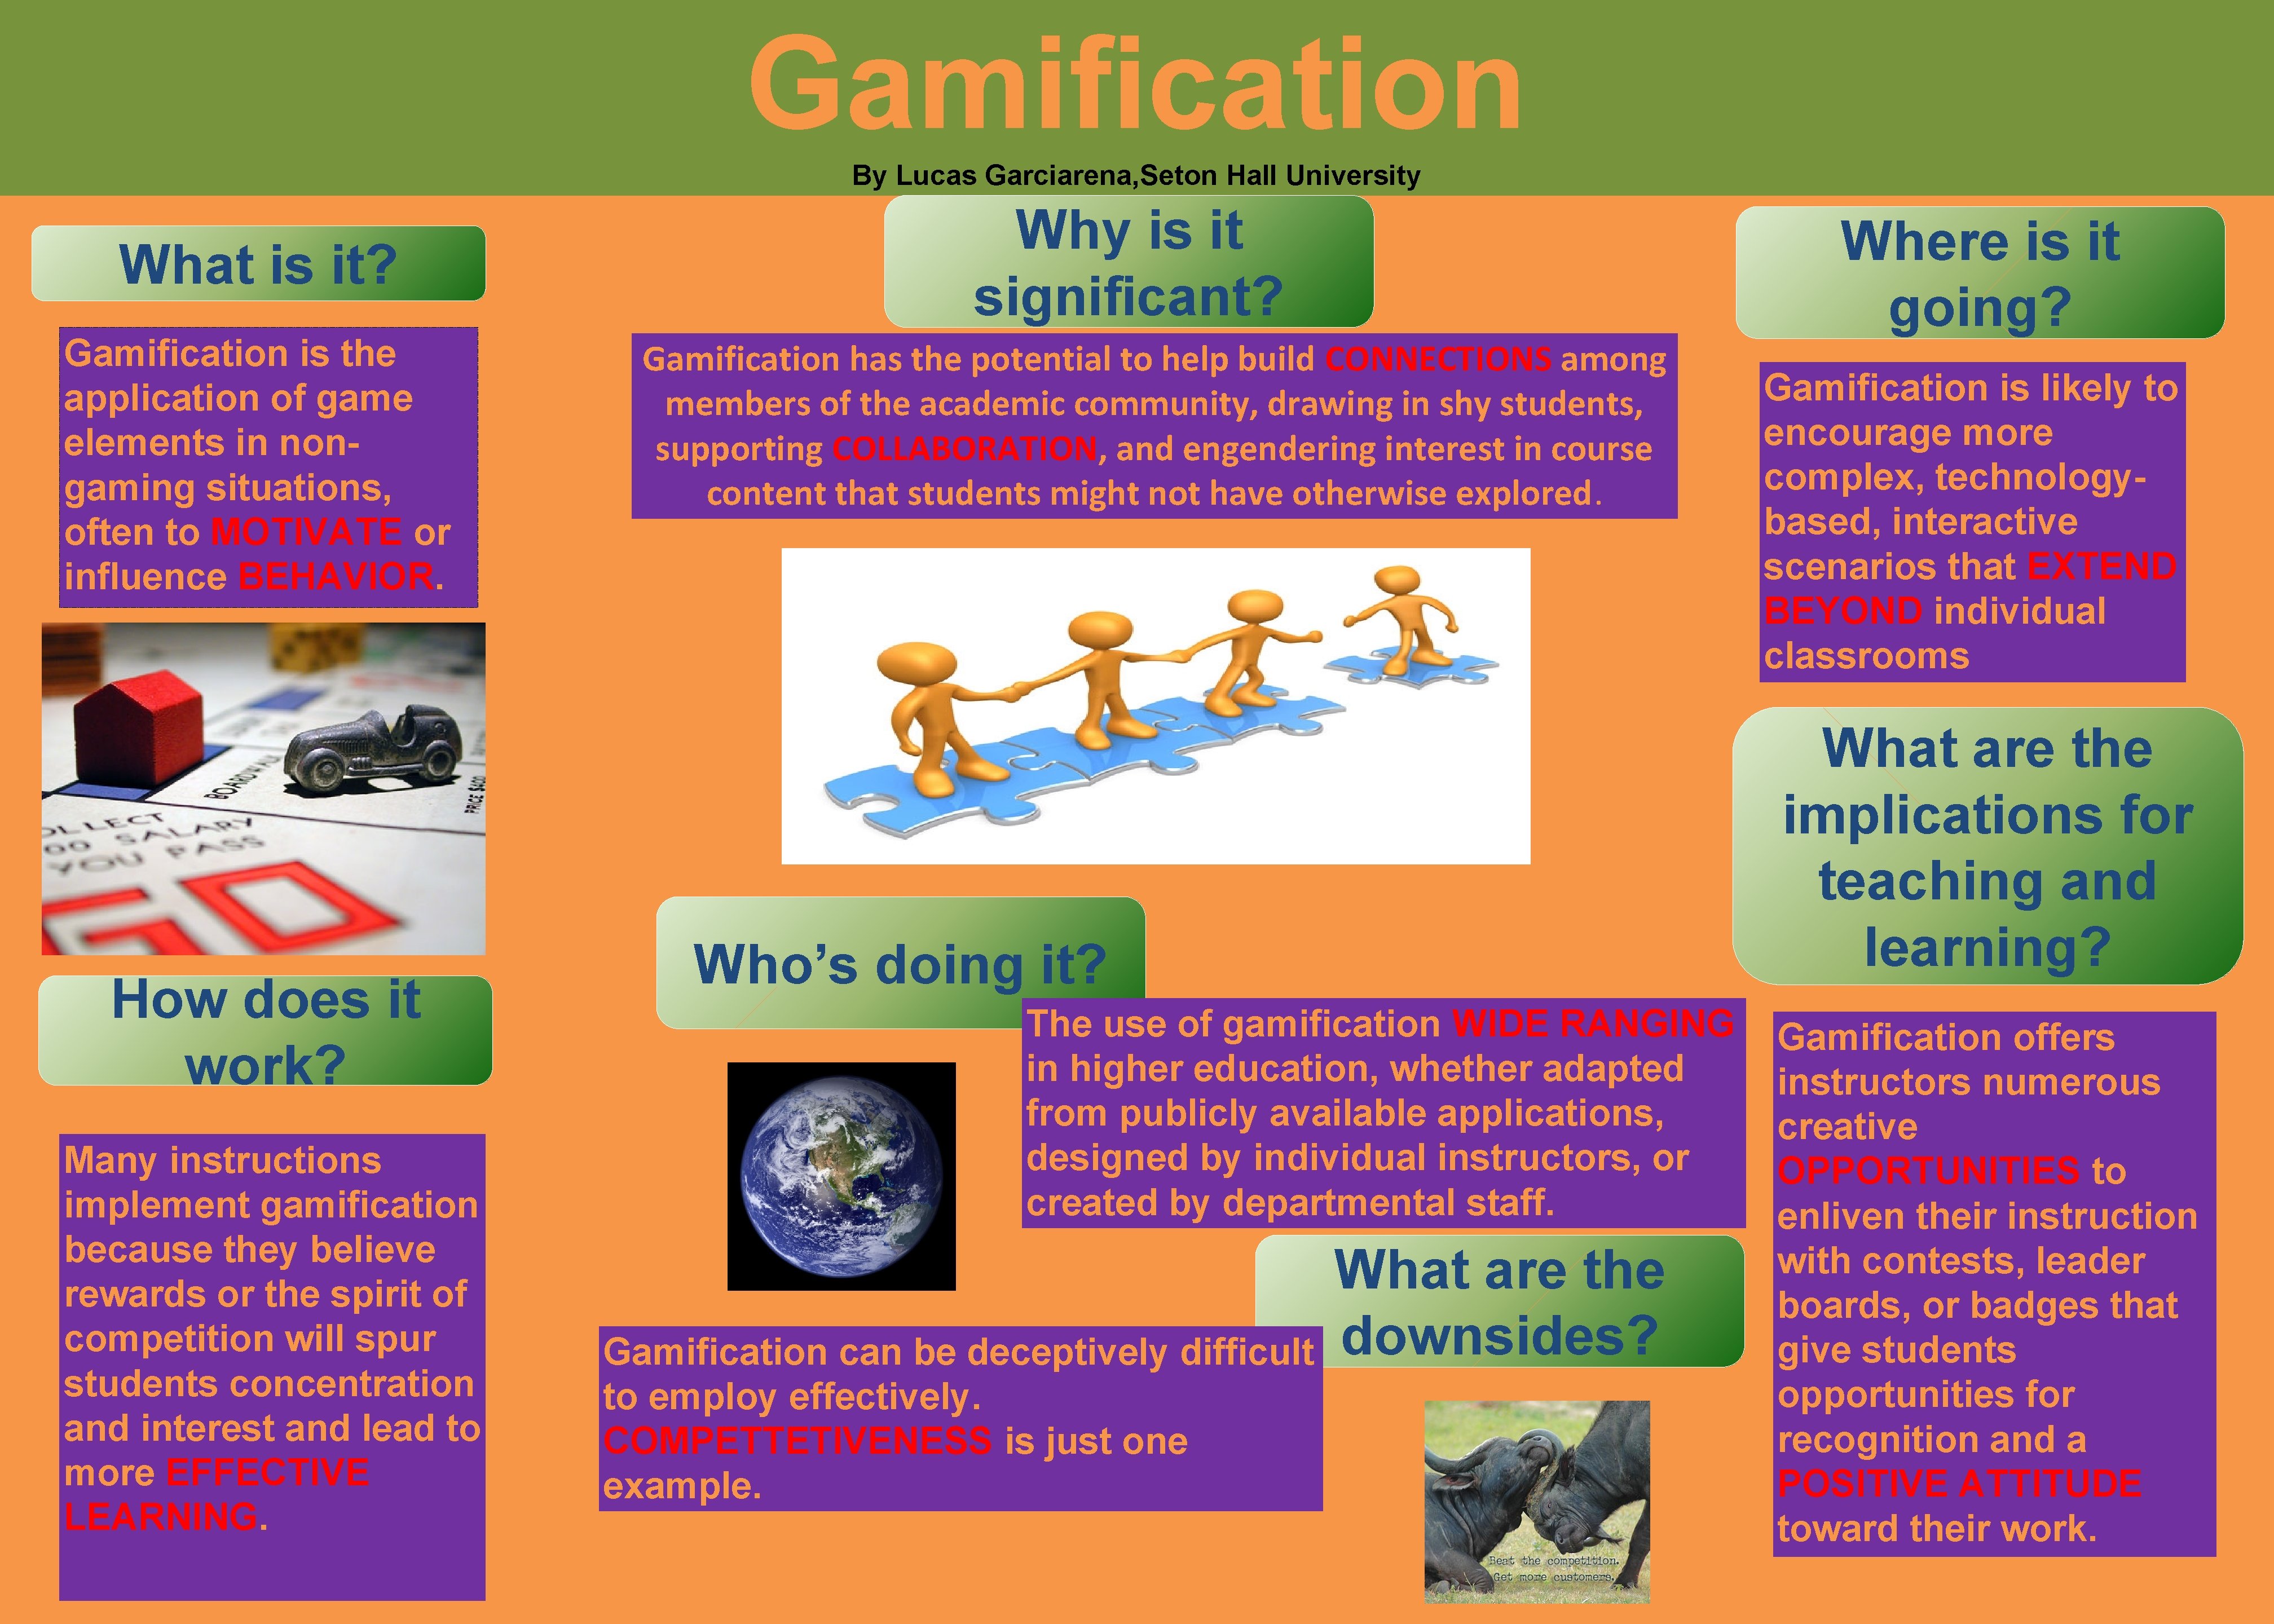 Gamification By Lucas Garciarena, Seton Hall University What is it? Gamification is the application